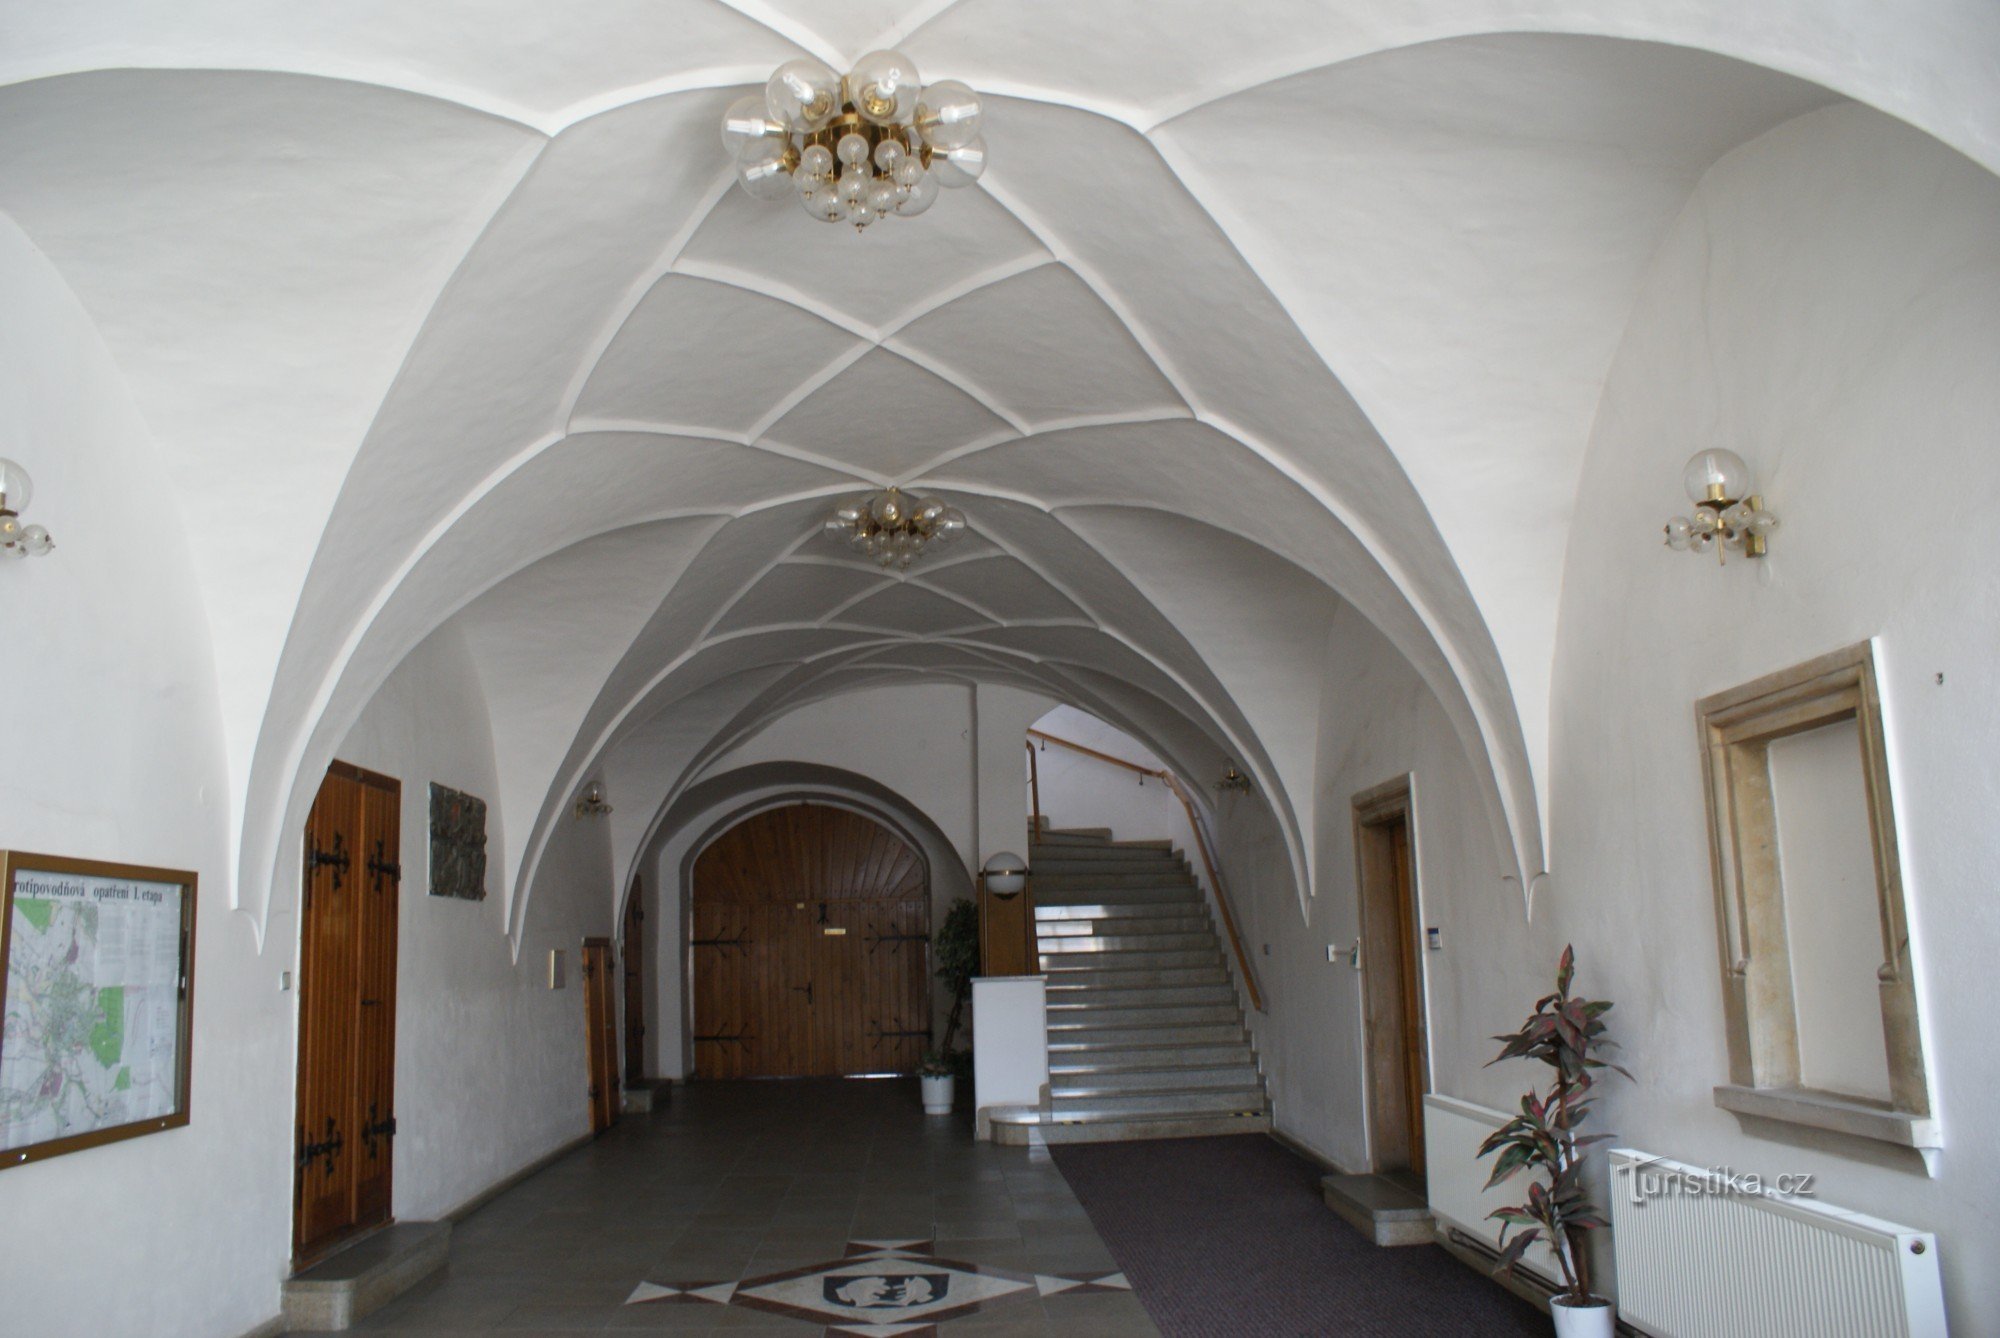 the interior of the town hall